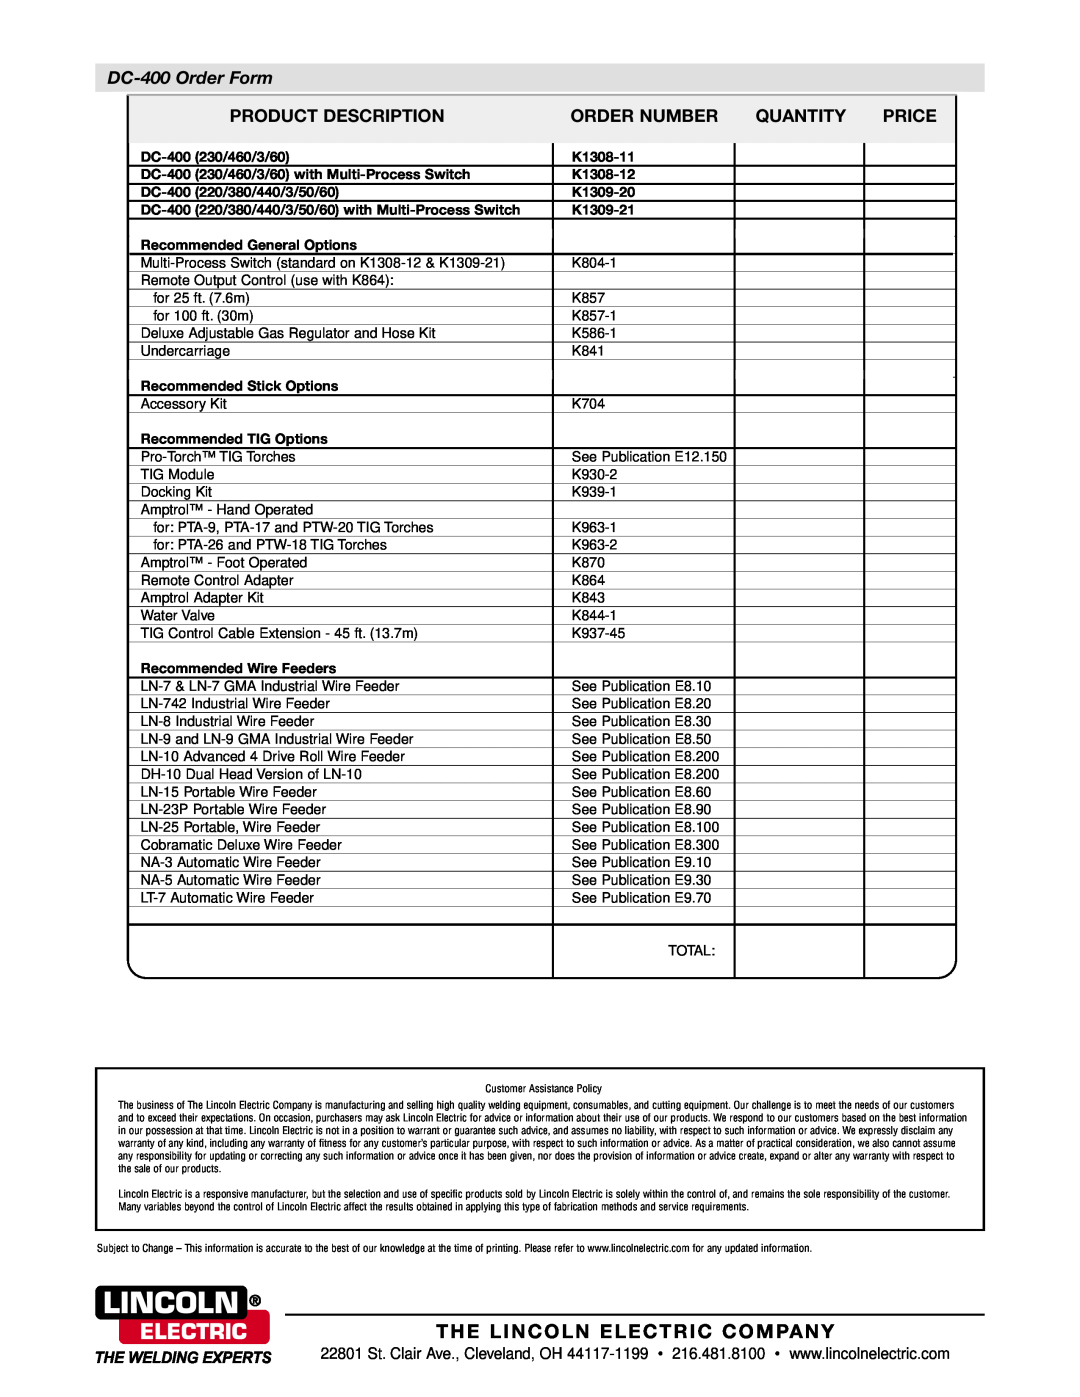 Lincoln Electric K1309-21, K1308-12, K1309-20, K1308-11 DC-400 Order Form, The Lincoln Electric Company 